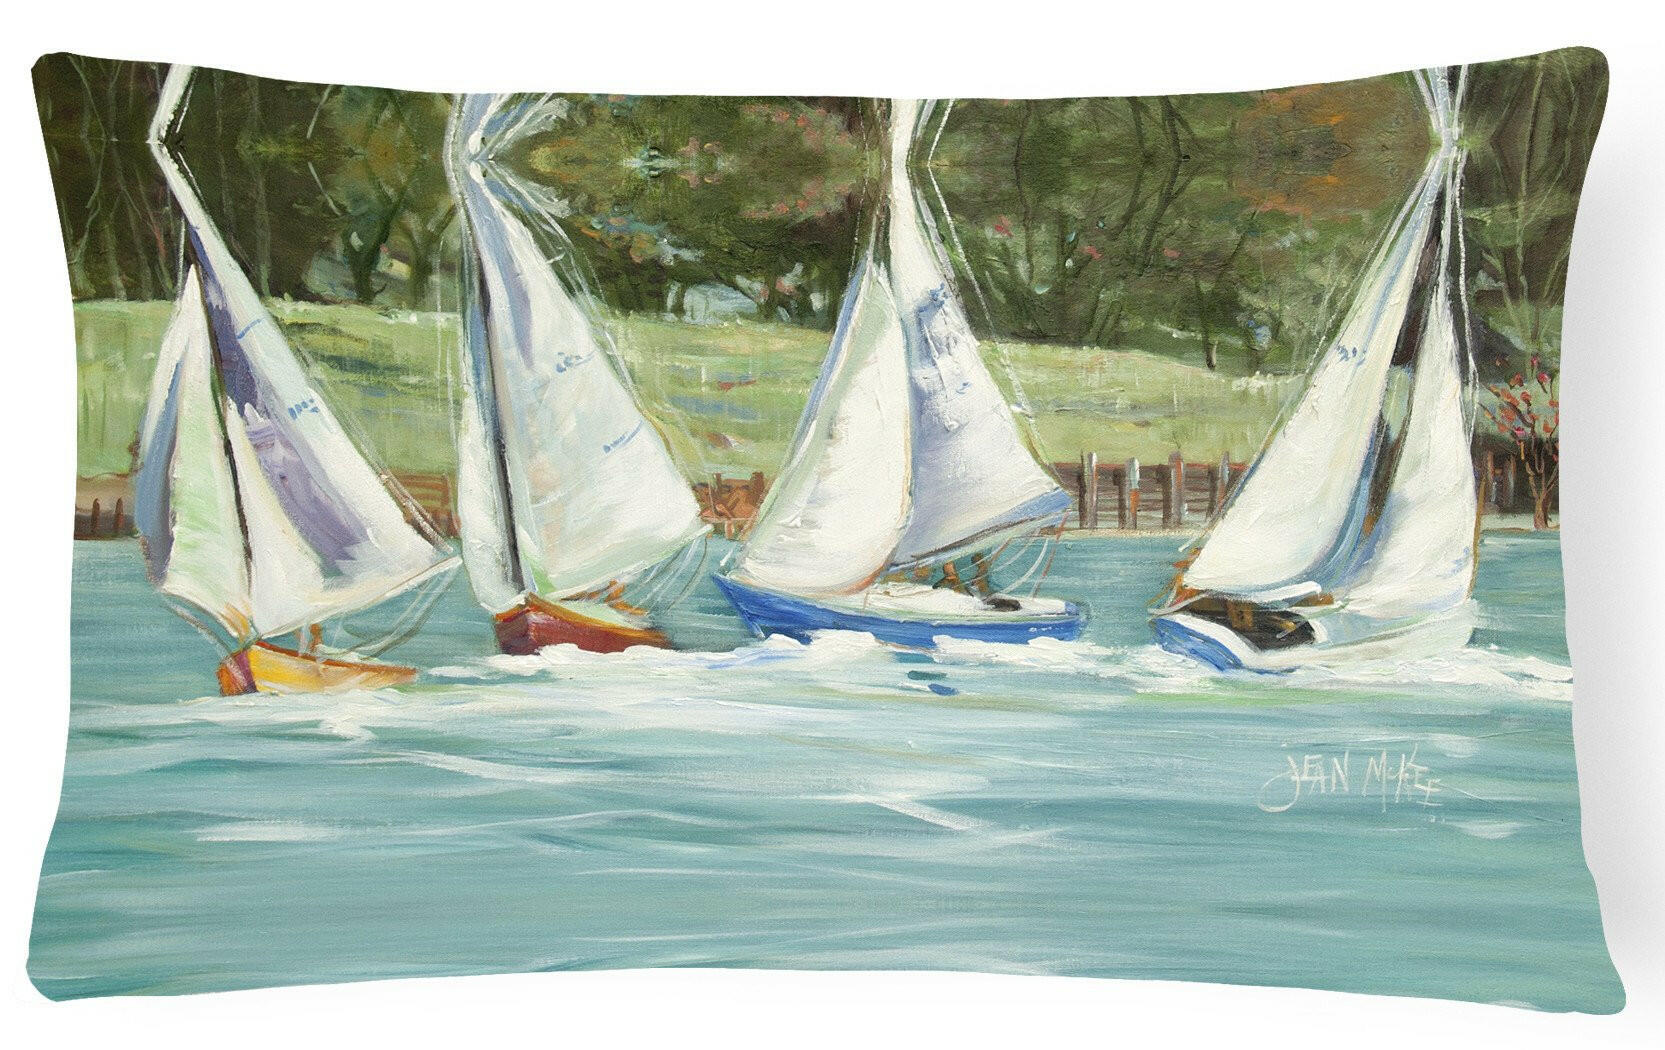 Sailboats on the bay Canvas Fabric Decorative Pillow JMK1035PW1216 by Caroline's Treasures